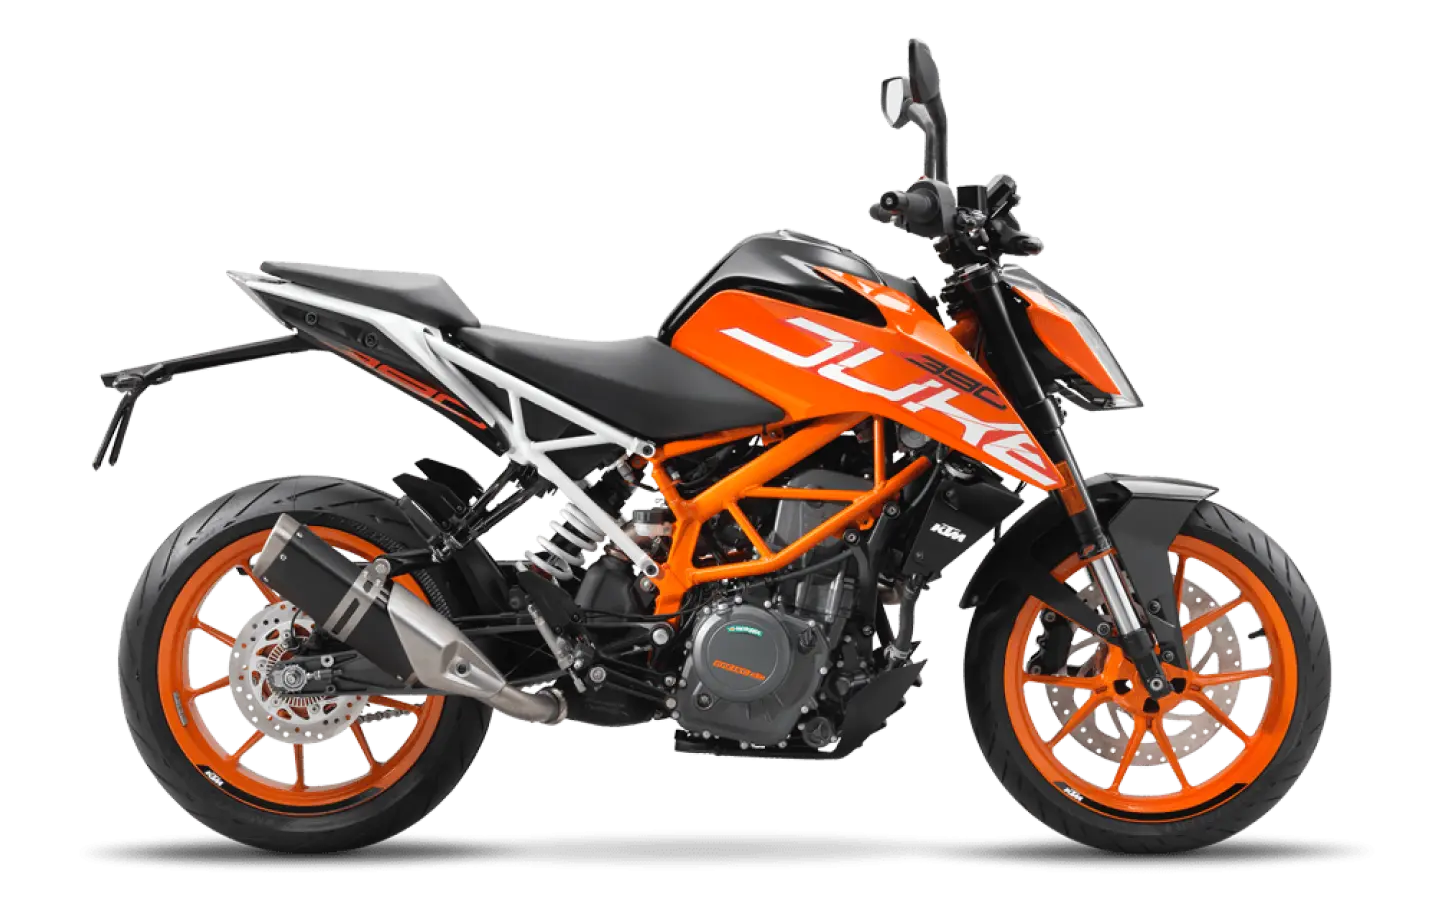 New KTM RC 390 SPOTTED - Looks production ready » MotorOctane